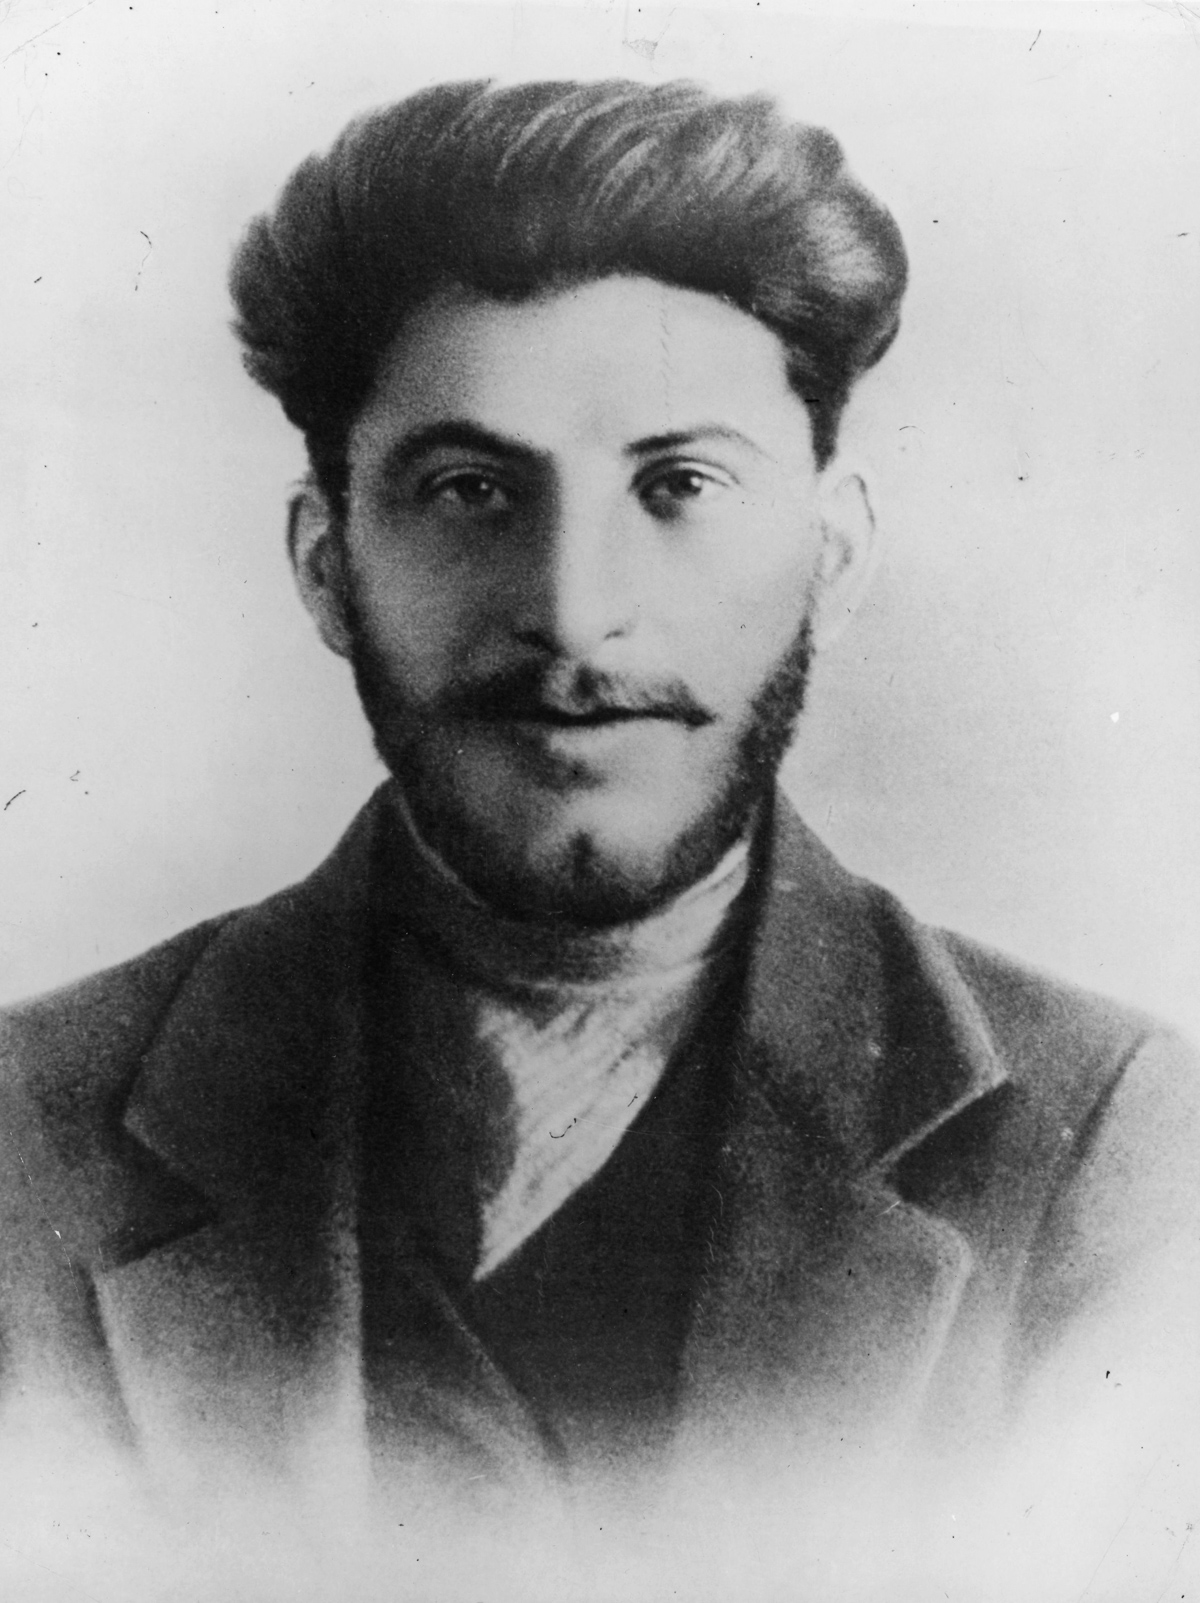 A young Joseph Stalin before the USSR